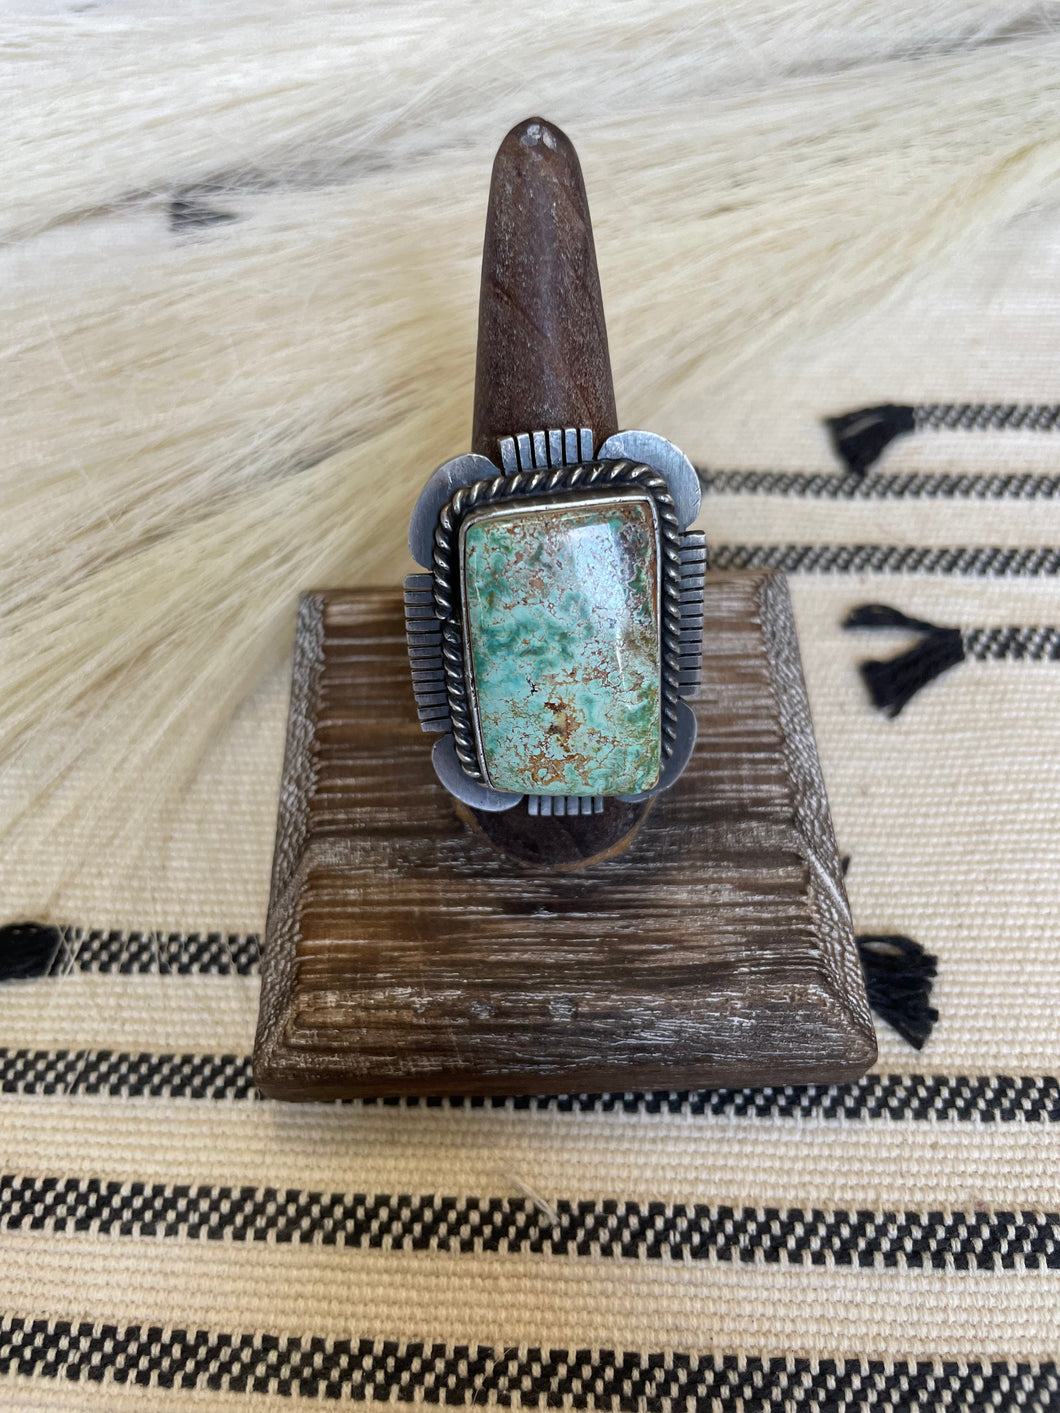 Navajo Turquoise & Sterling Silver Ring Size 10 Signed Russell Sam